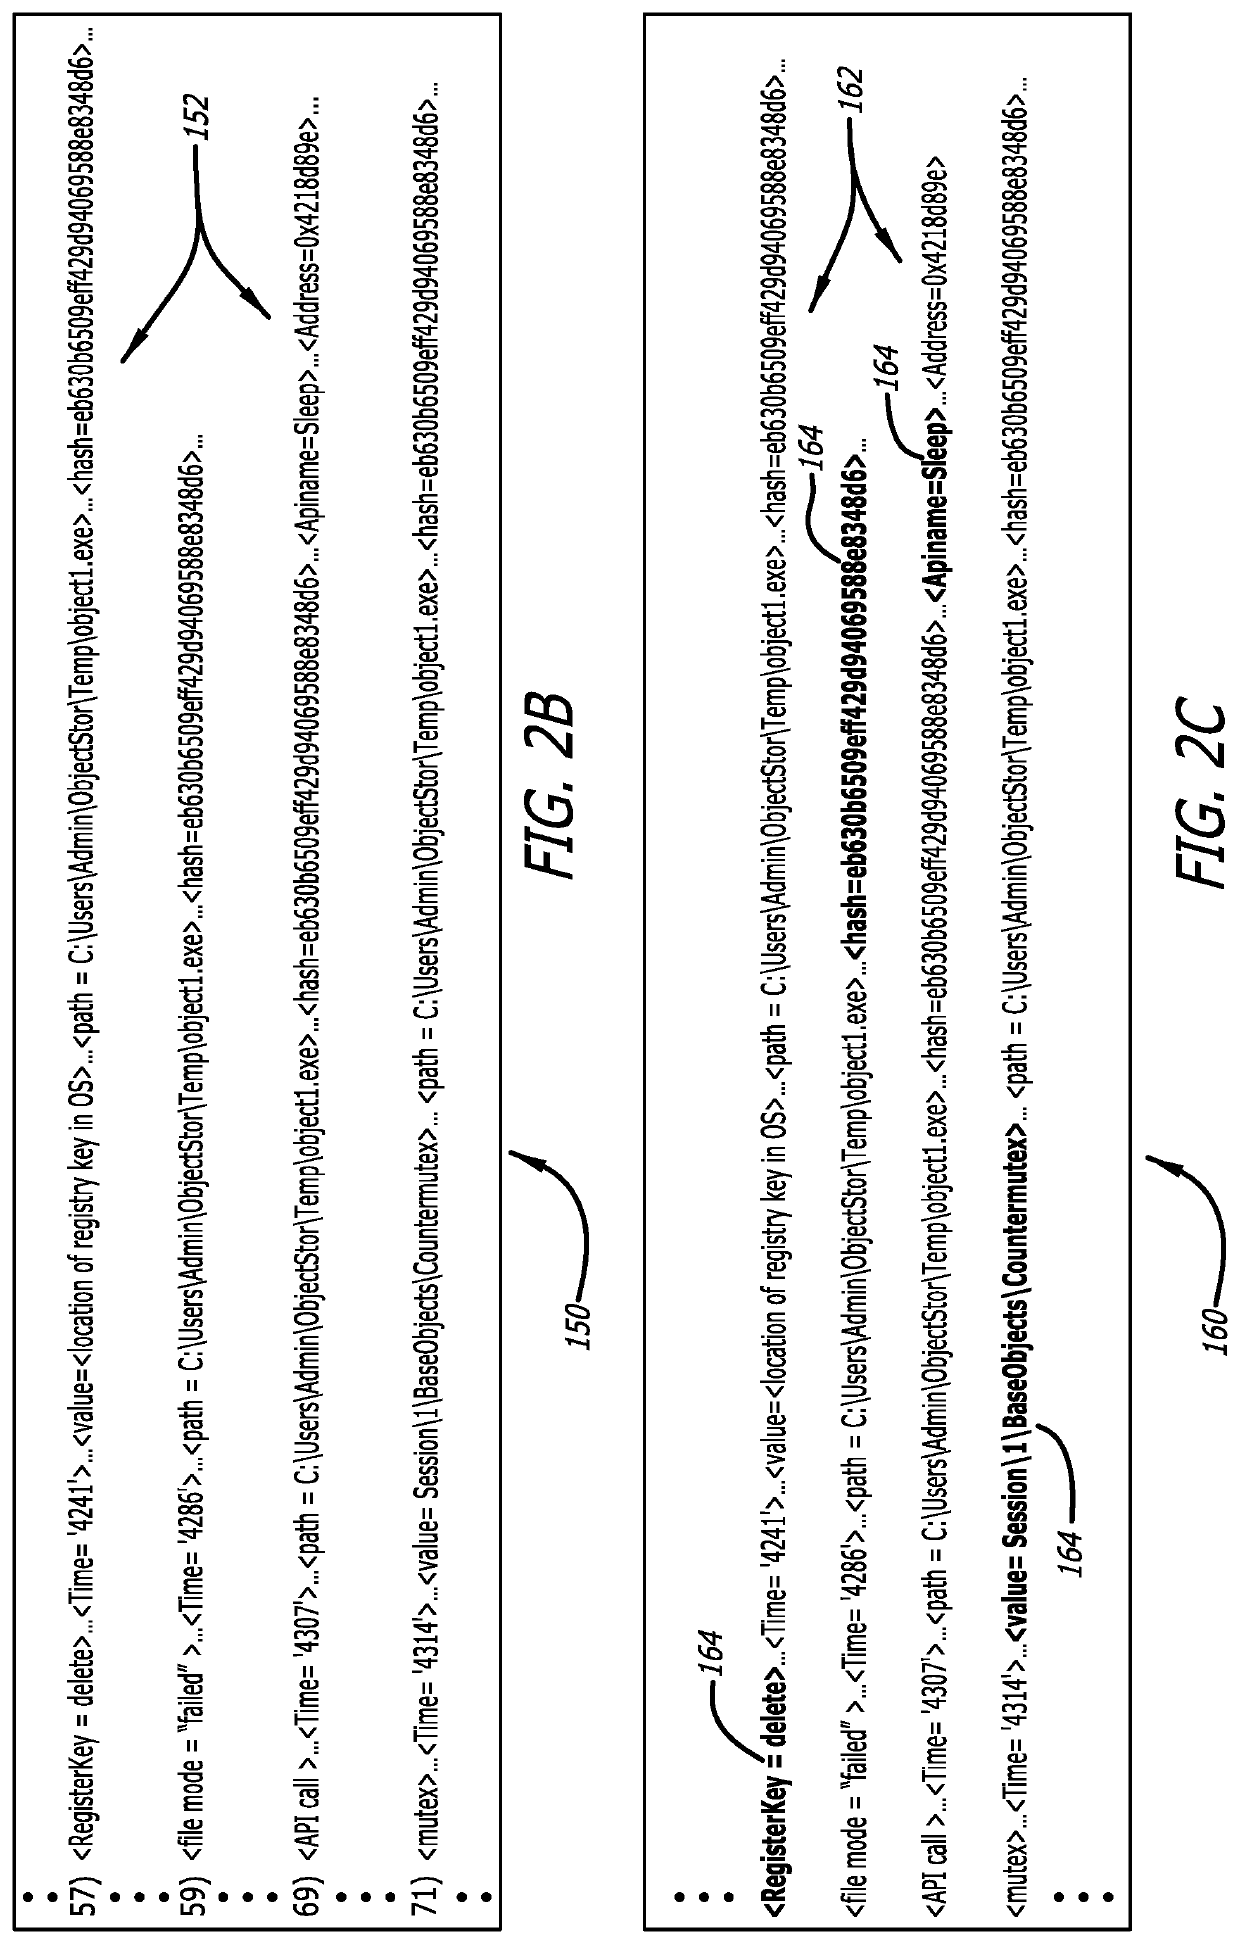 System and method for automatically generating malware detection rule recommendations